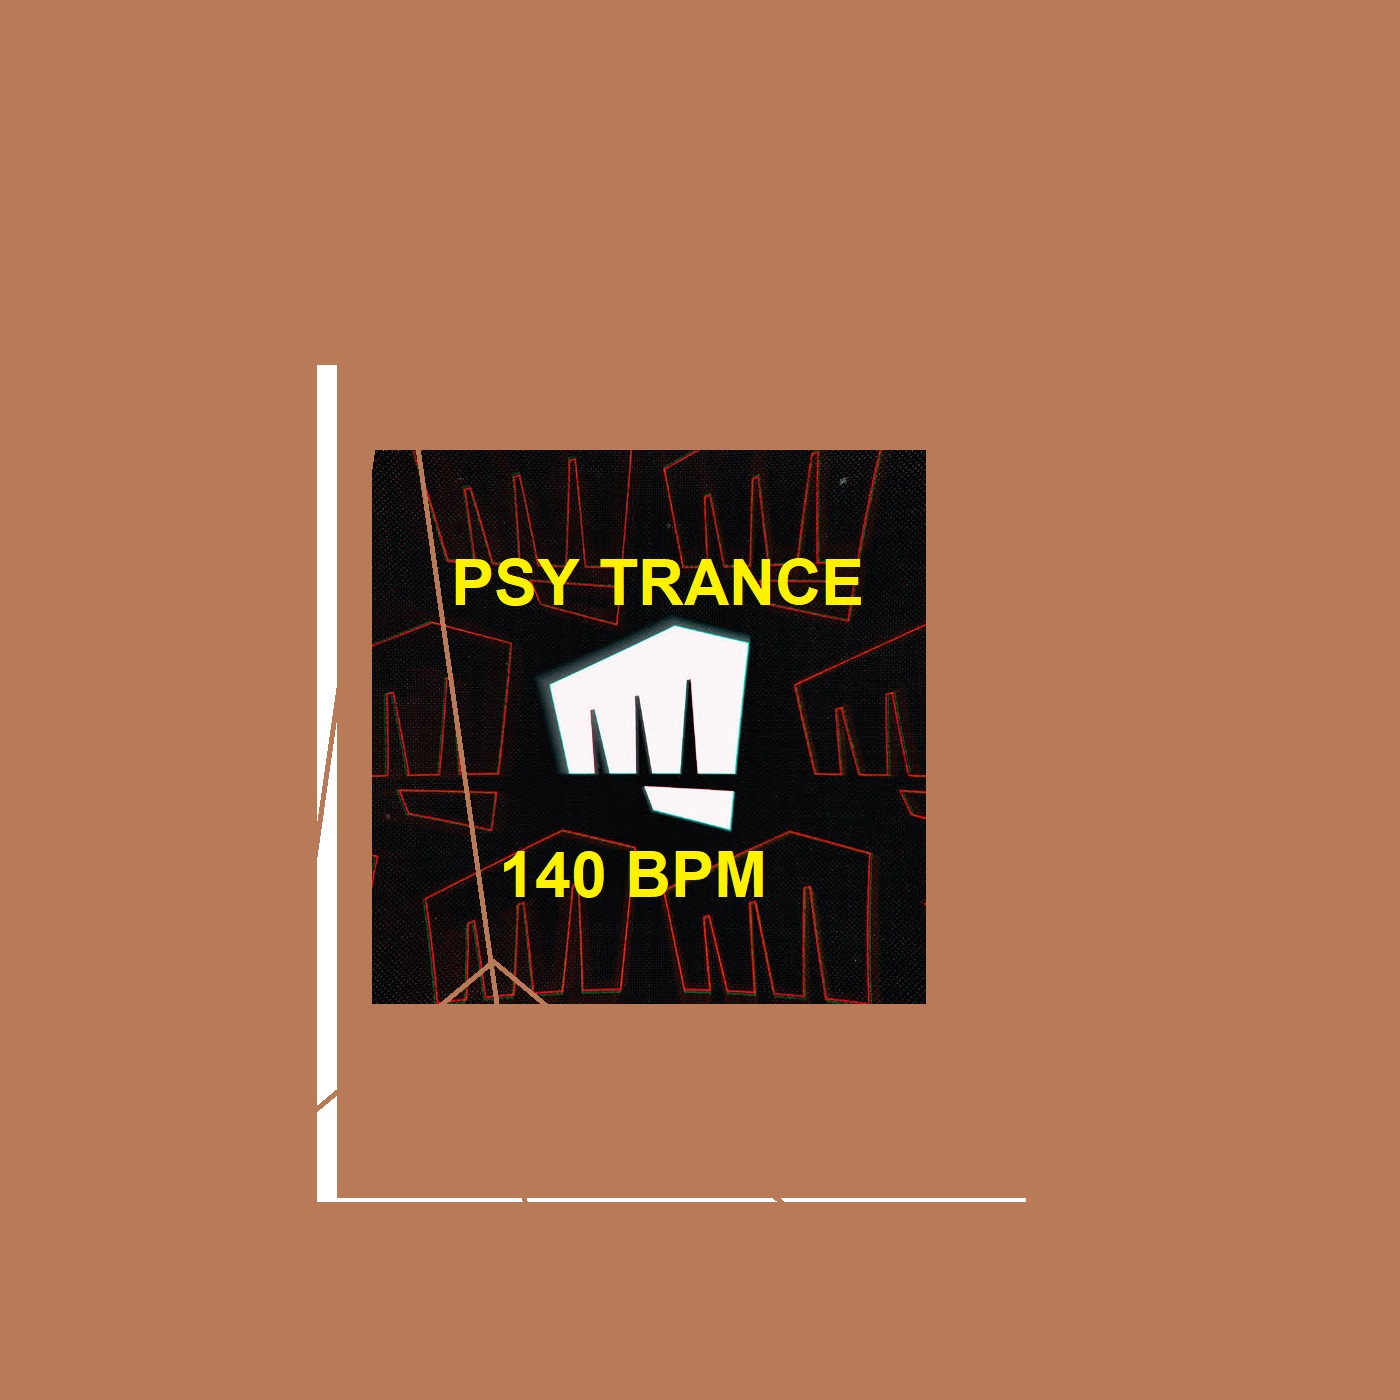 Psy Trance - Vocal Loop Indiana (Ableton 10 Template)